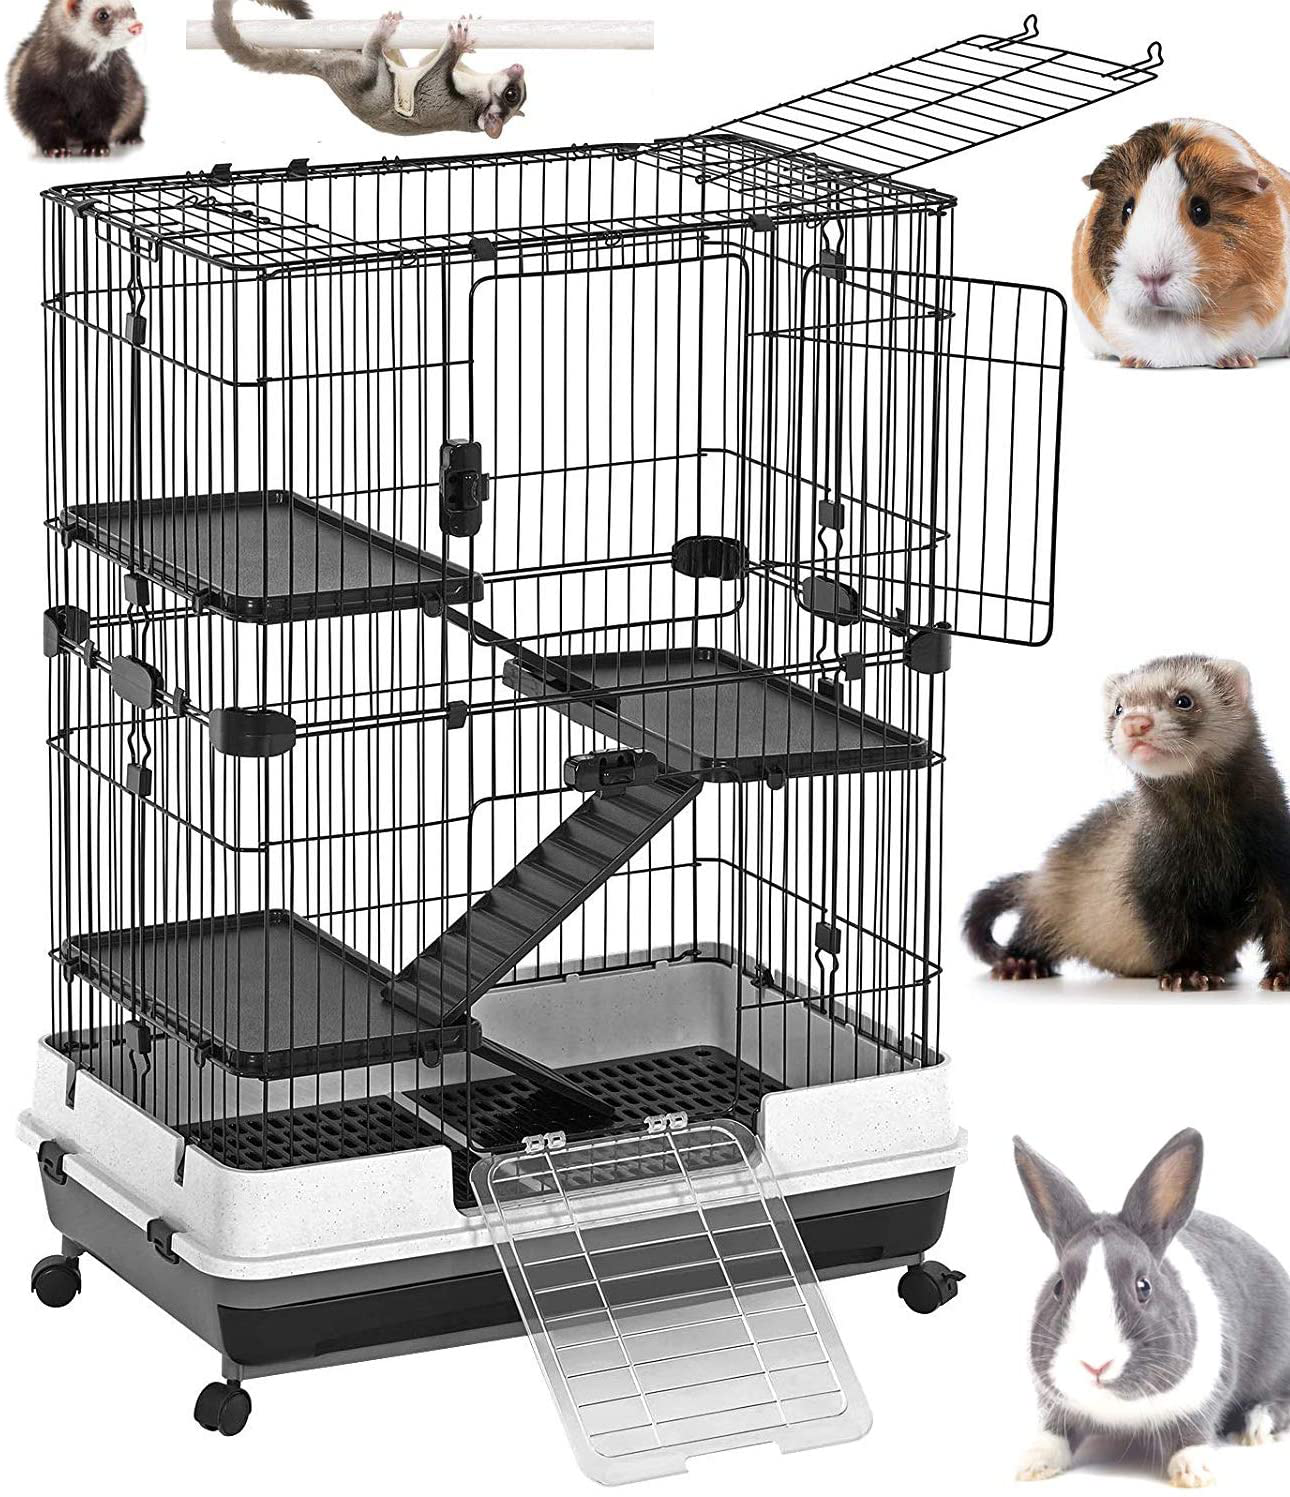 Mcage Large 32”L Indoor Small Animal Rabbit Cage Small Animal Hutch with Lockable Wheels